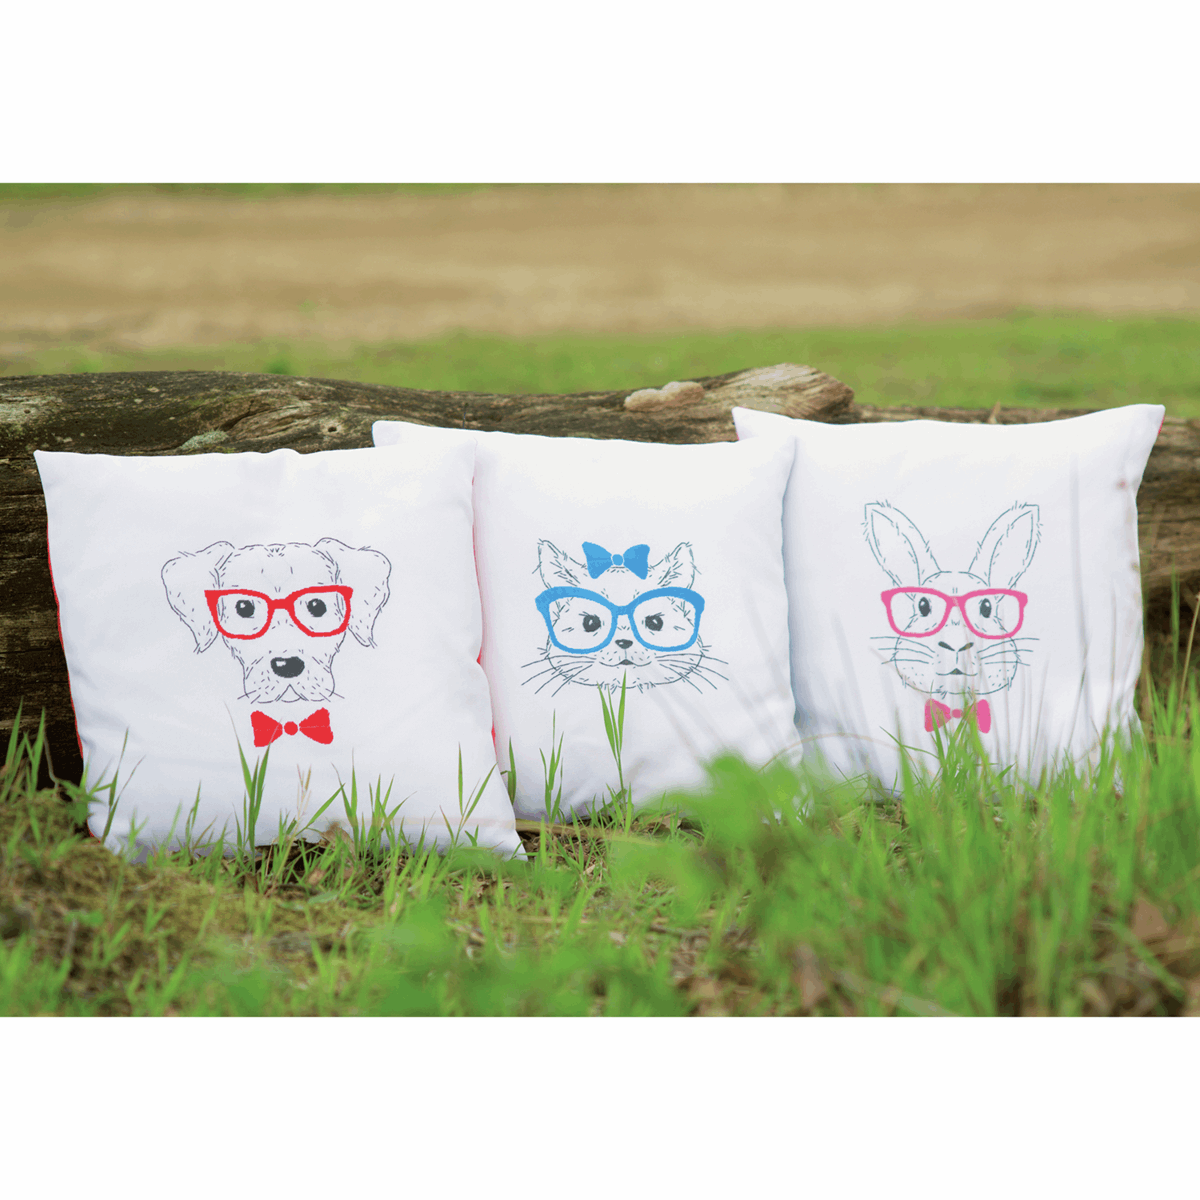 Embroidery Cushion Kit - Dog with Red Glasses